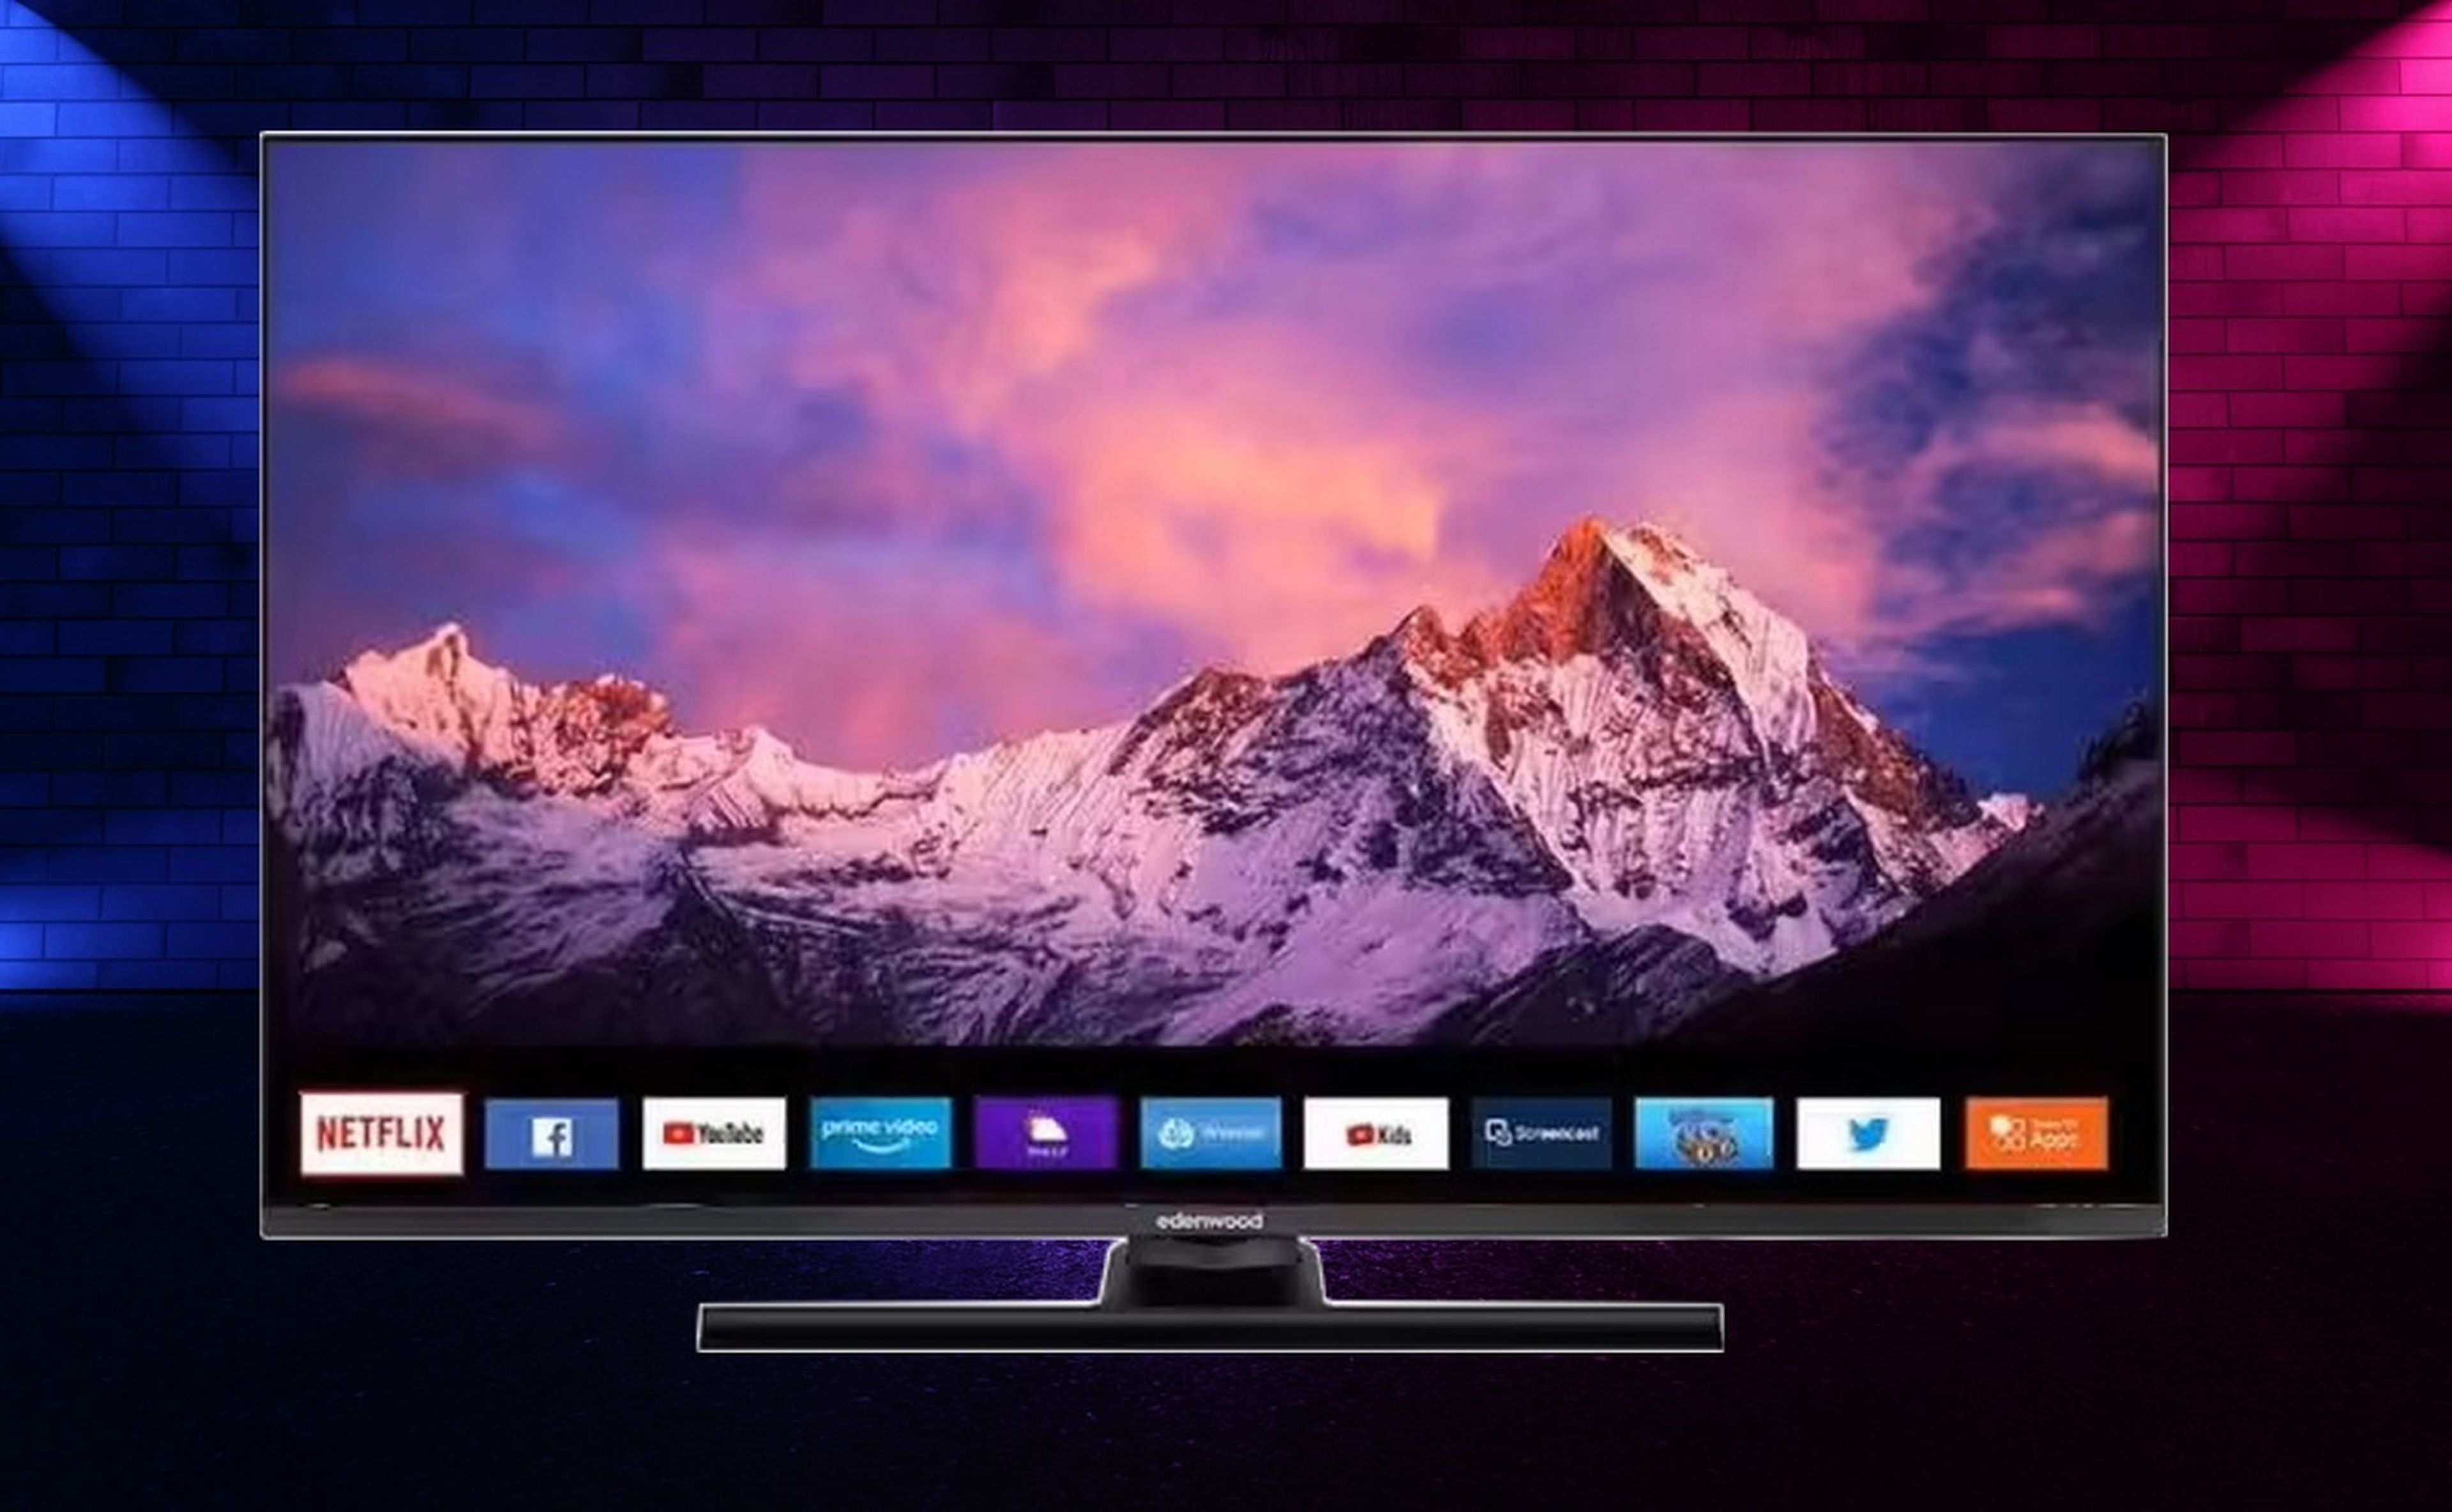 If you have 270 euros, that's all you need to buy a 43-inch QLED 4K TV